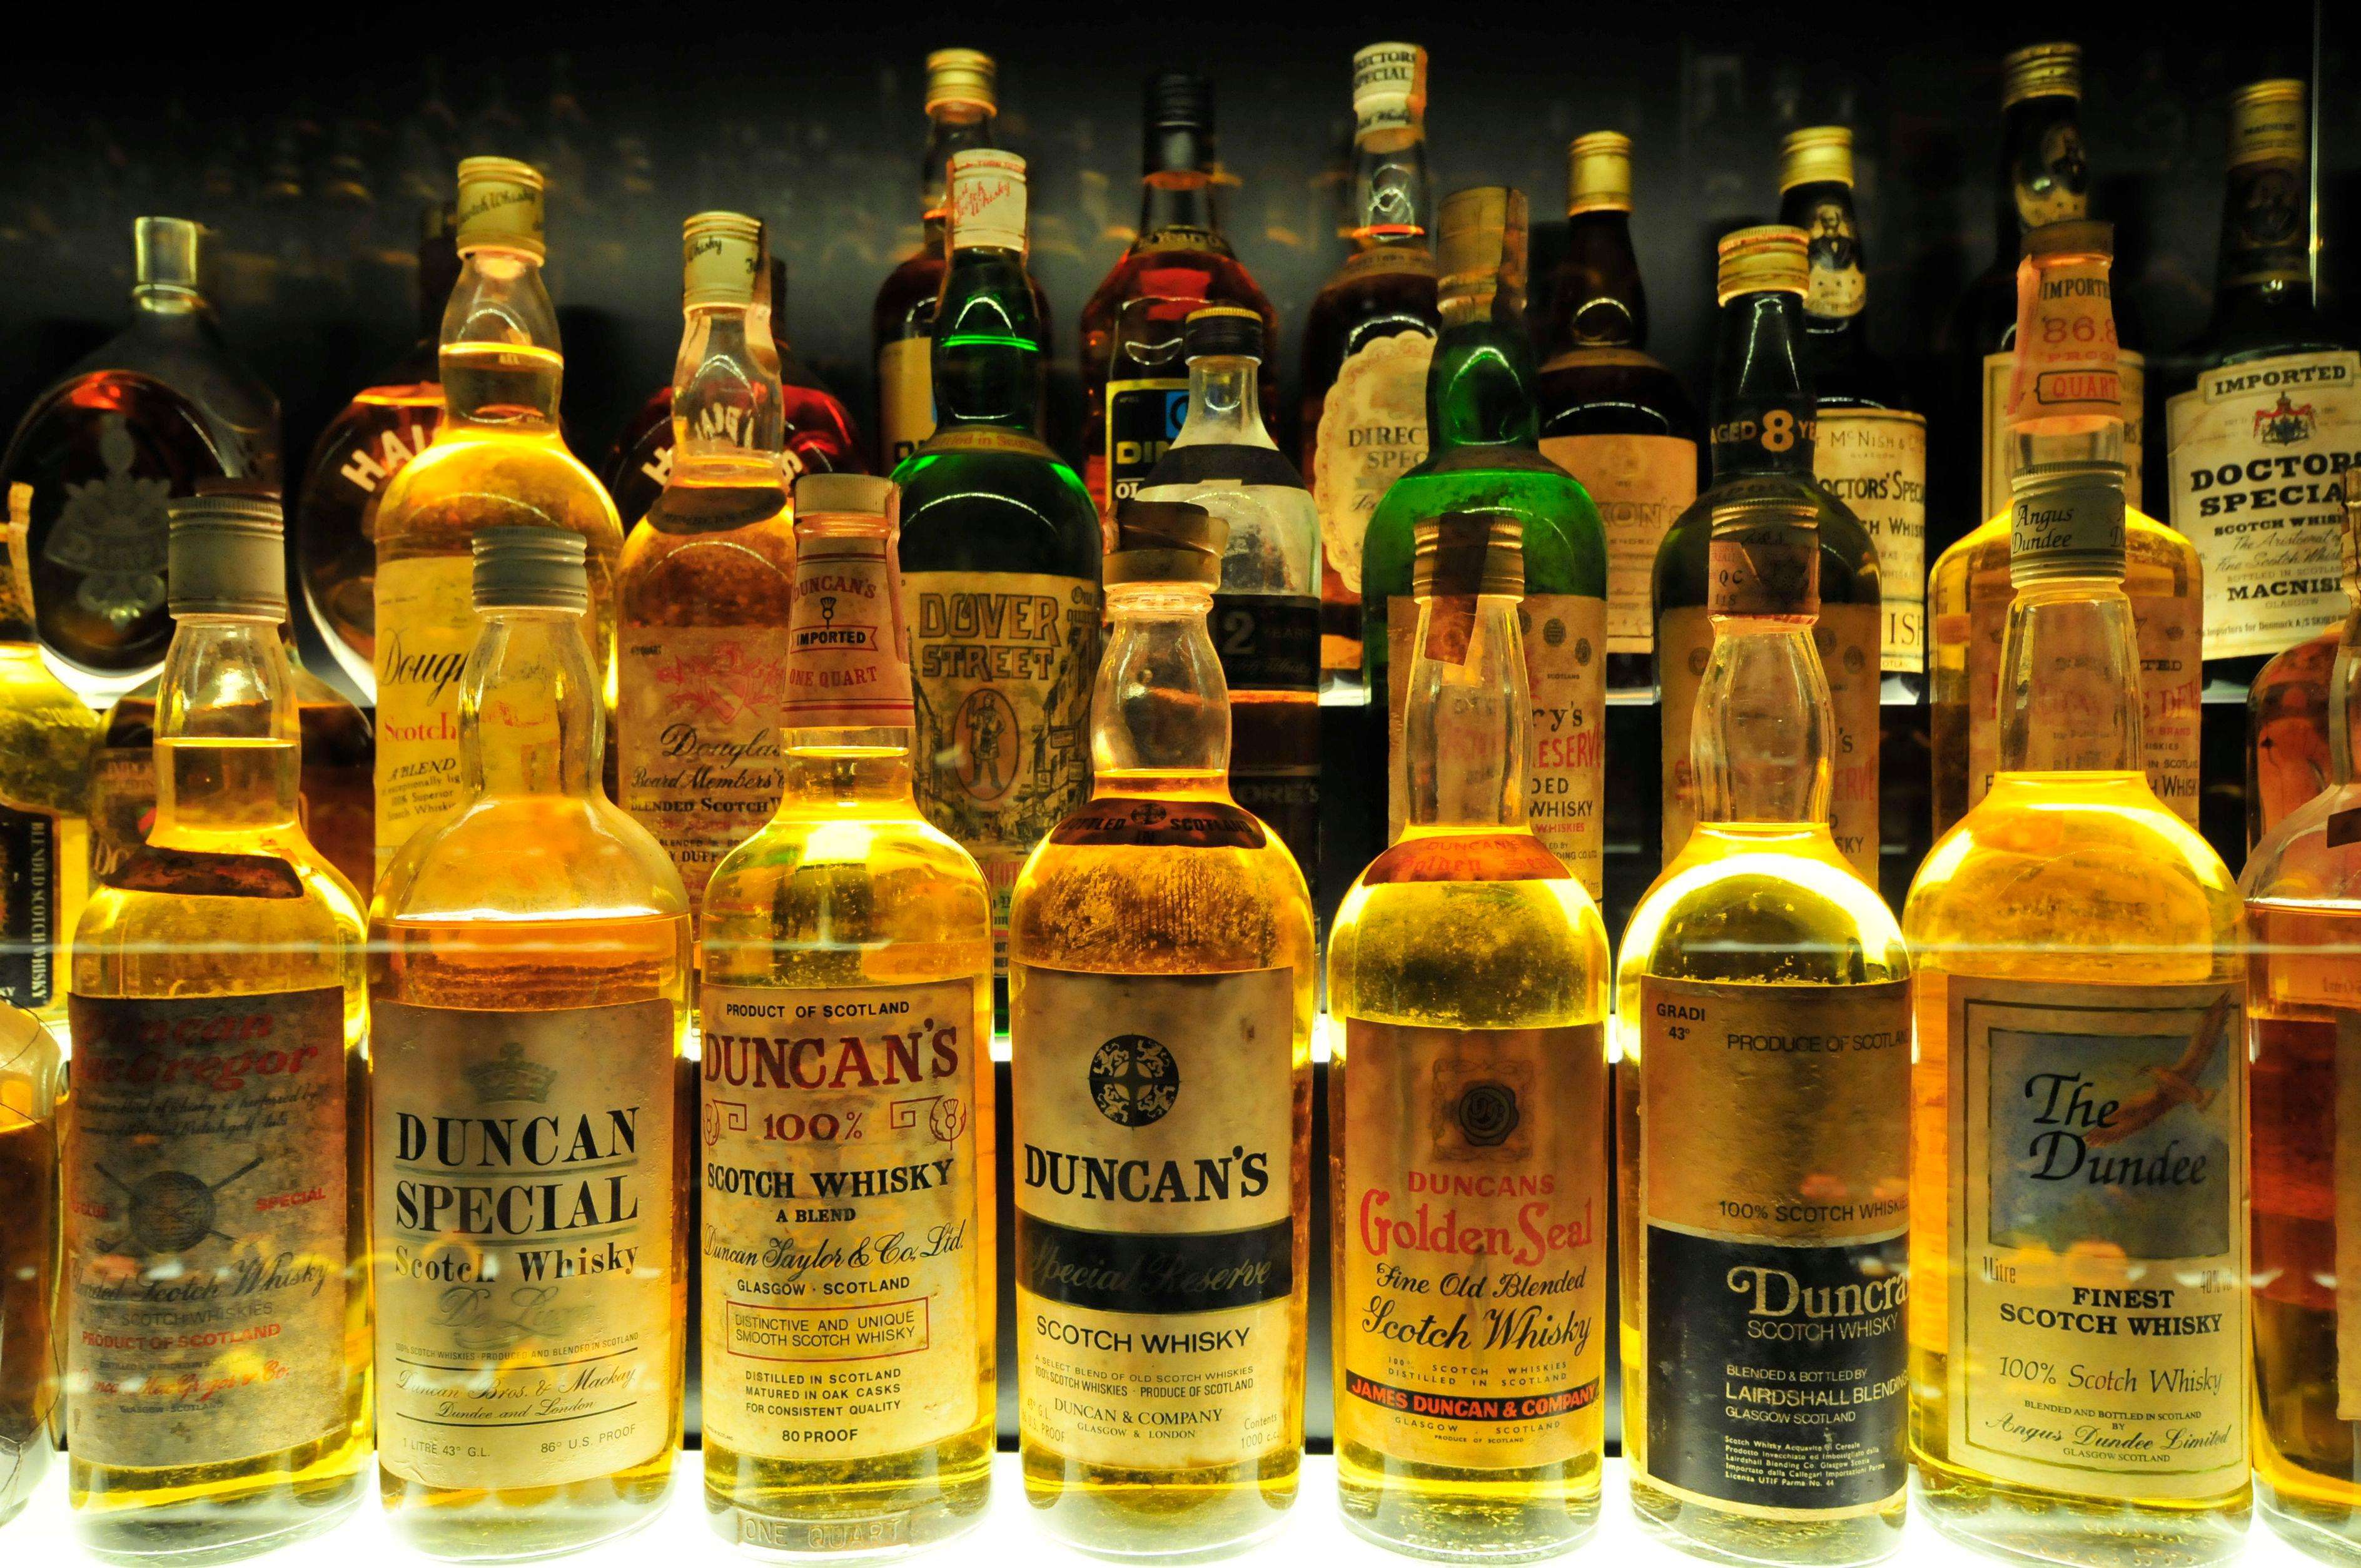 Brands on show at the Scotch Whisky Heritage Centre in Edinburgh, Scotland, which houses the largest whisky collection in the world. Western-style spirit sales hit US$700m last year in China, and are expected to rise another 71.5pc by 2020. Photo: Alamy